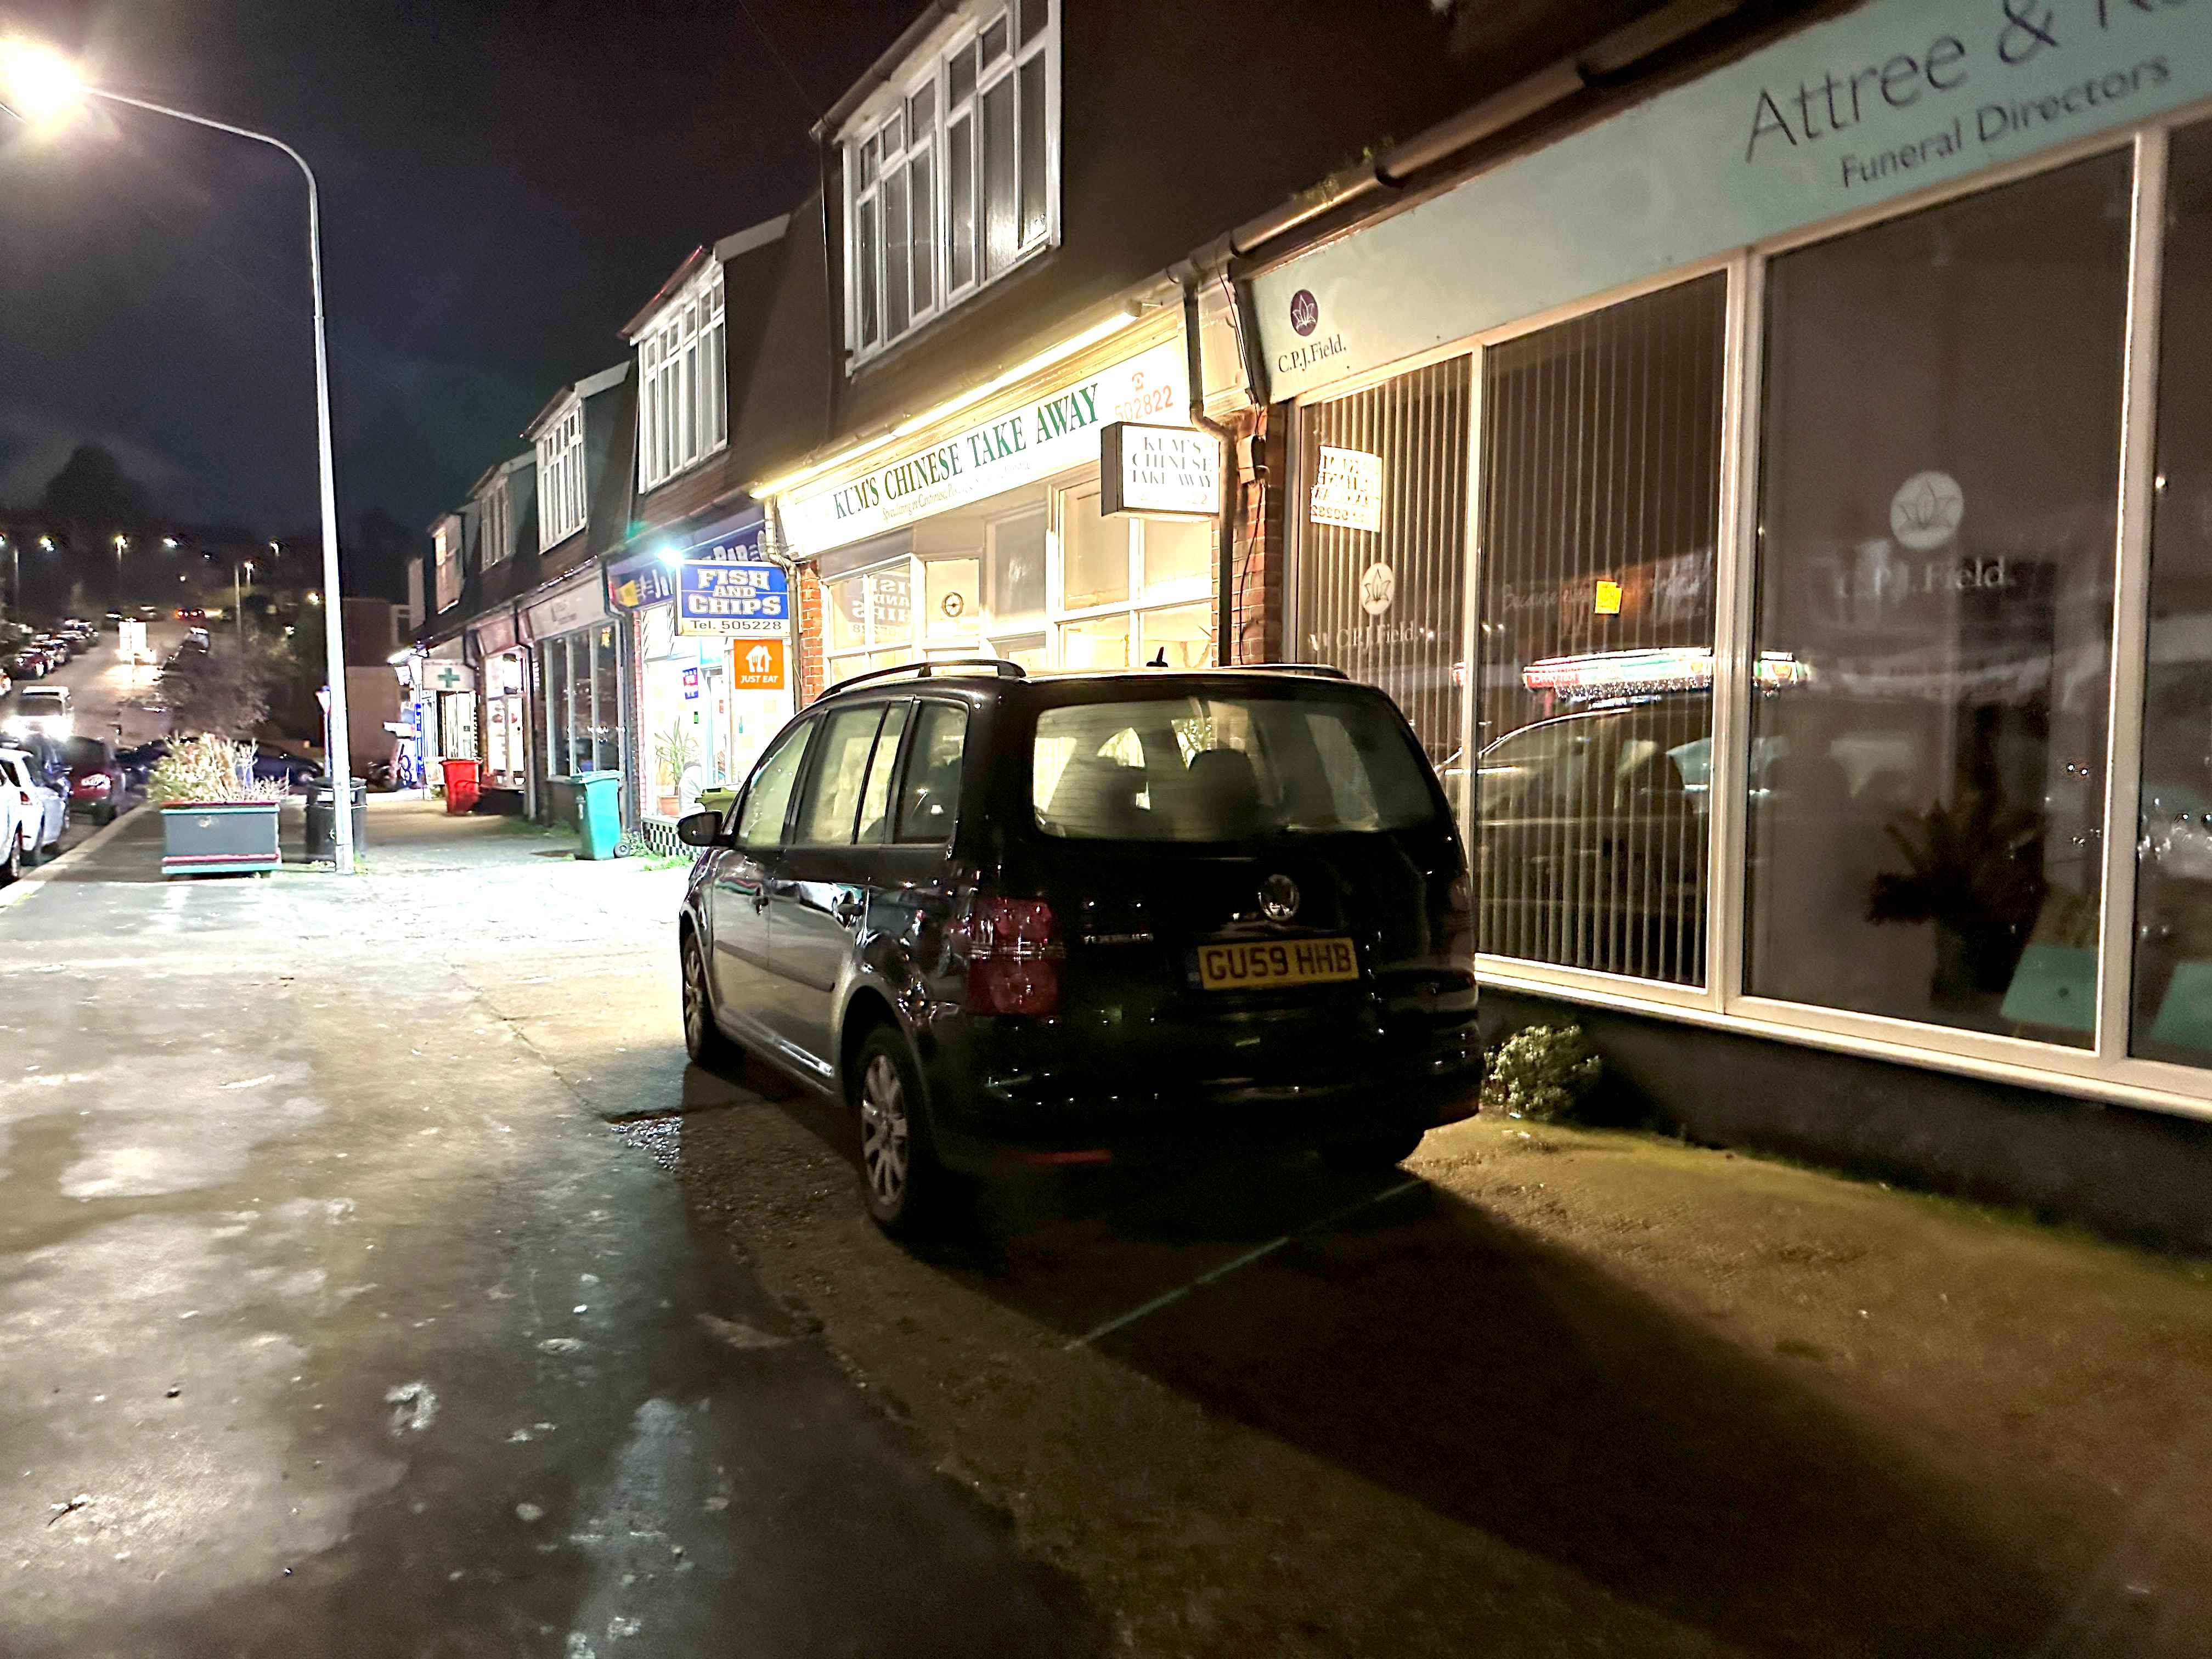 Photograph of GU59 HHB - a Black Volkswagen Touran parked in Hollingdean by a non-resident. The first of two photographs supplied by the residents of Hollingdean.